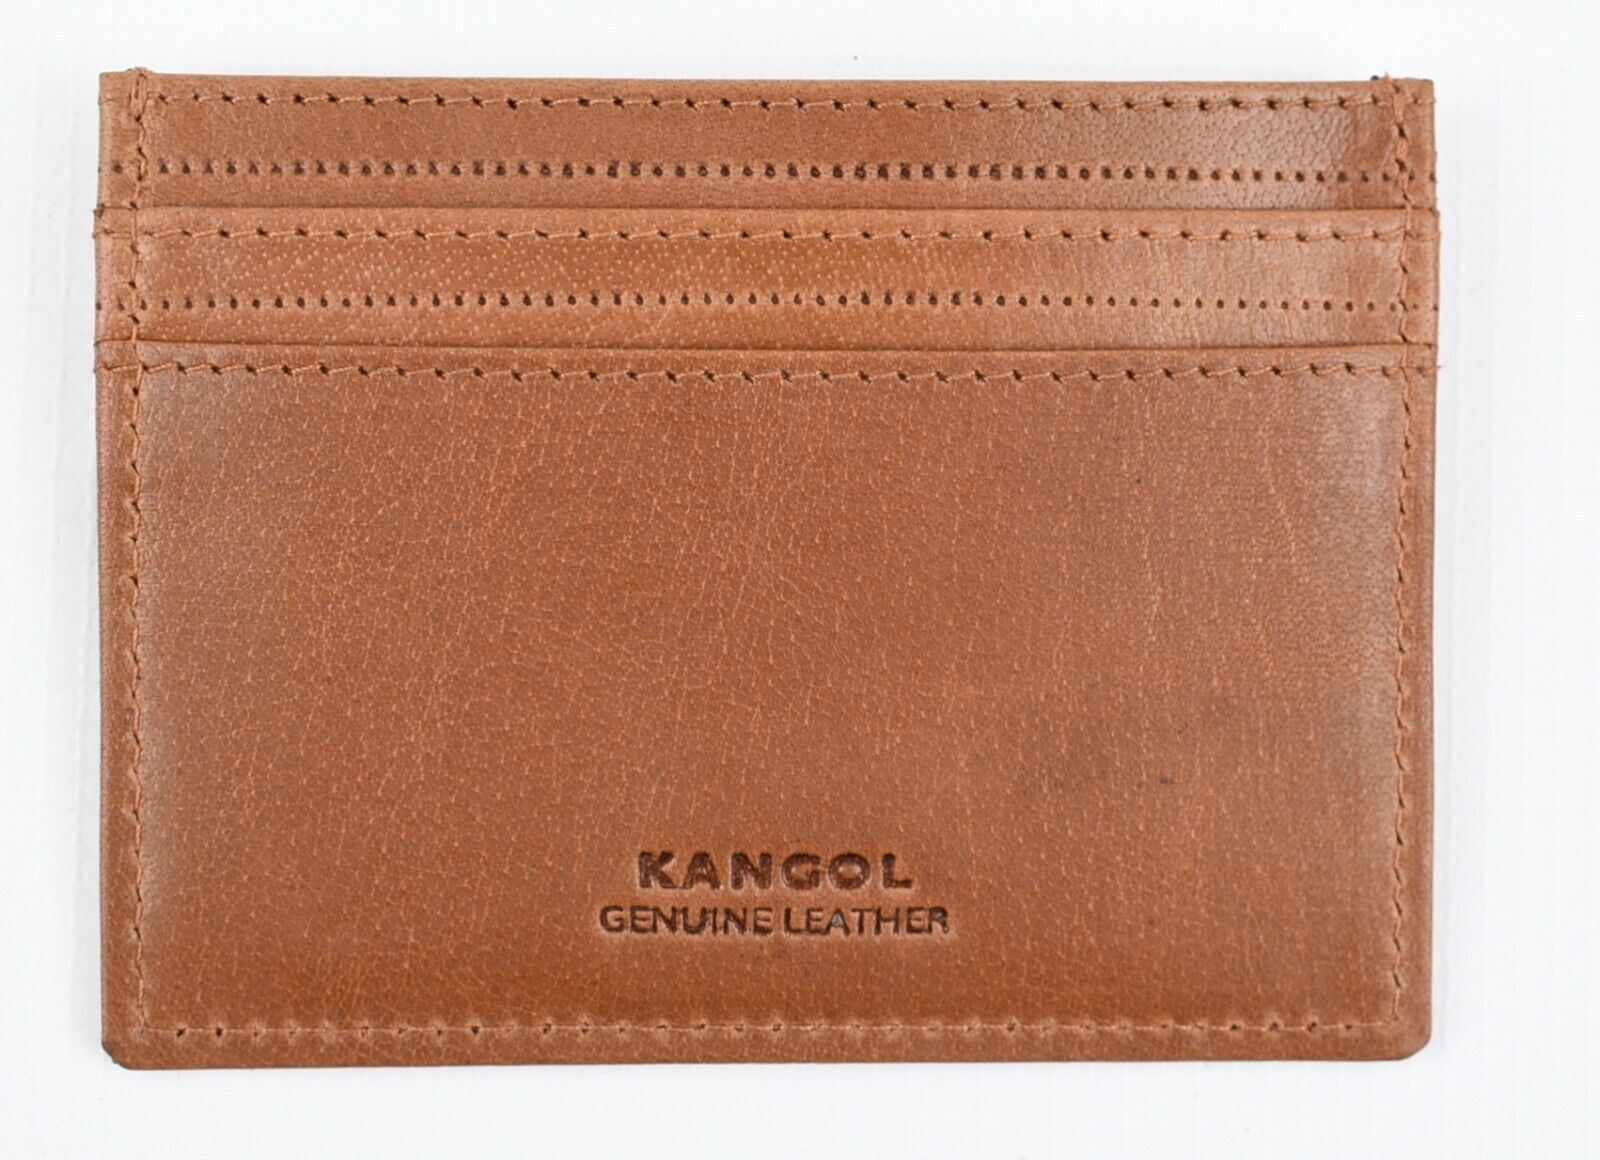 KANGOL Genuine Leather Card Holder, Cognac Brown, Gift Boxed RFID Protected